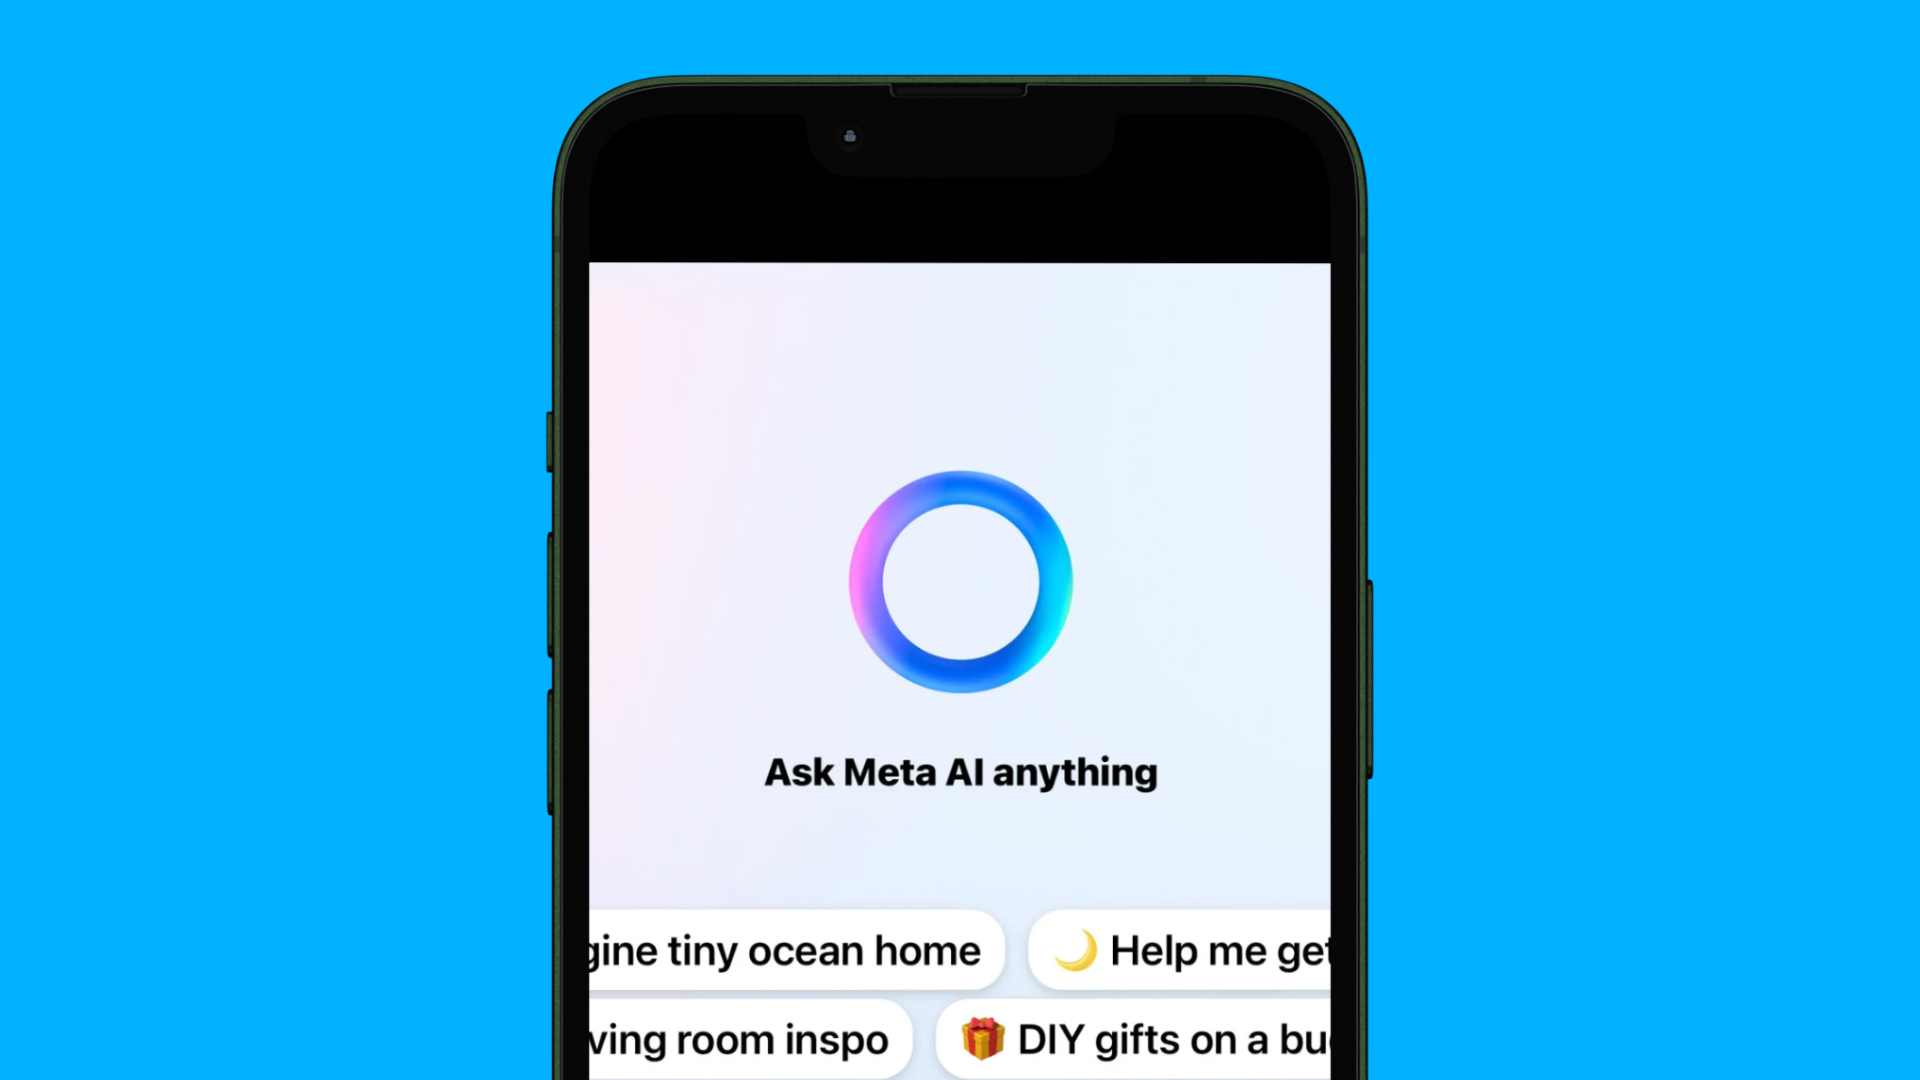 Mobile phone screen showing the Ask Meta AI on Messenger interface with various prompt suggestions.